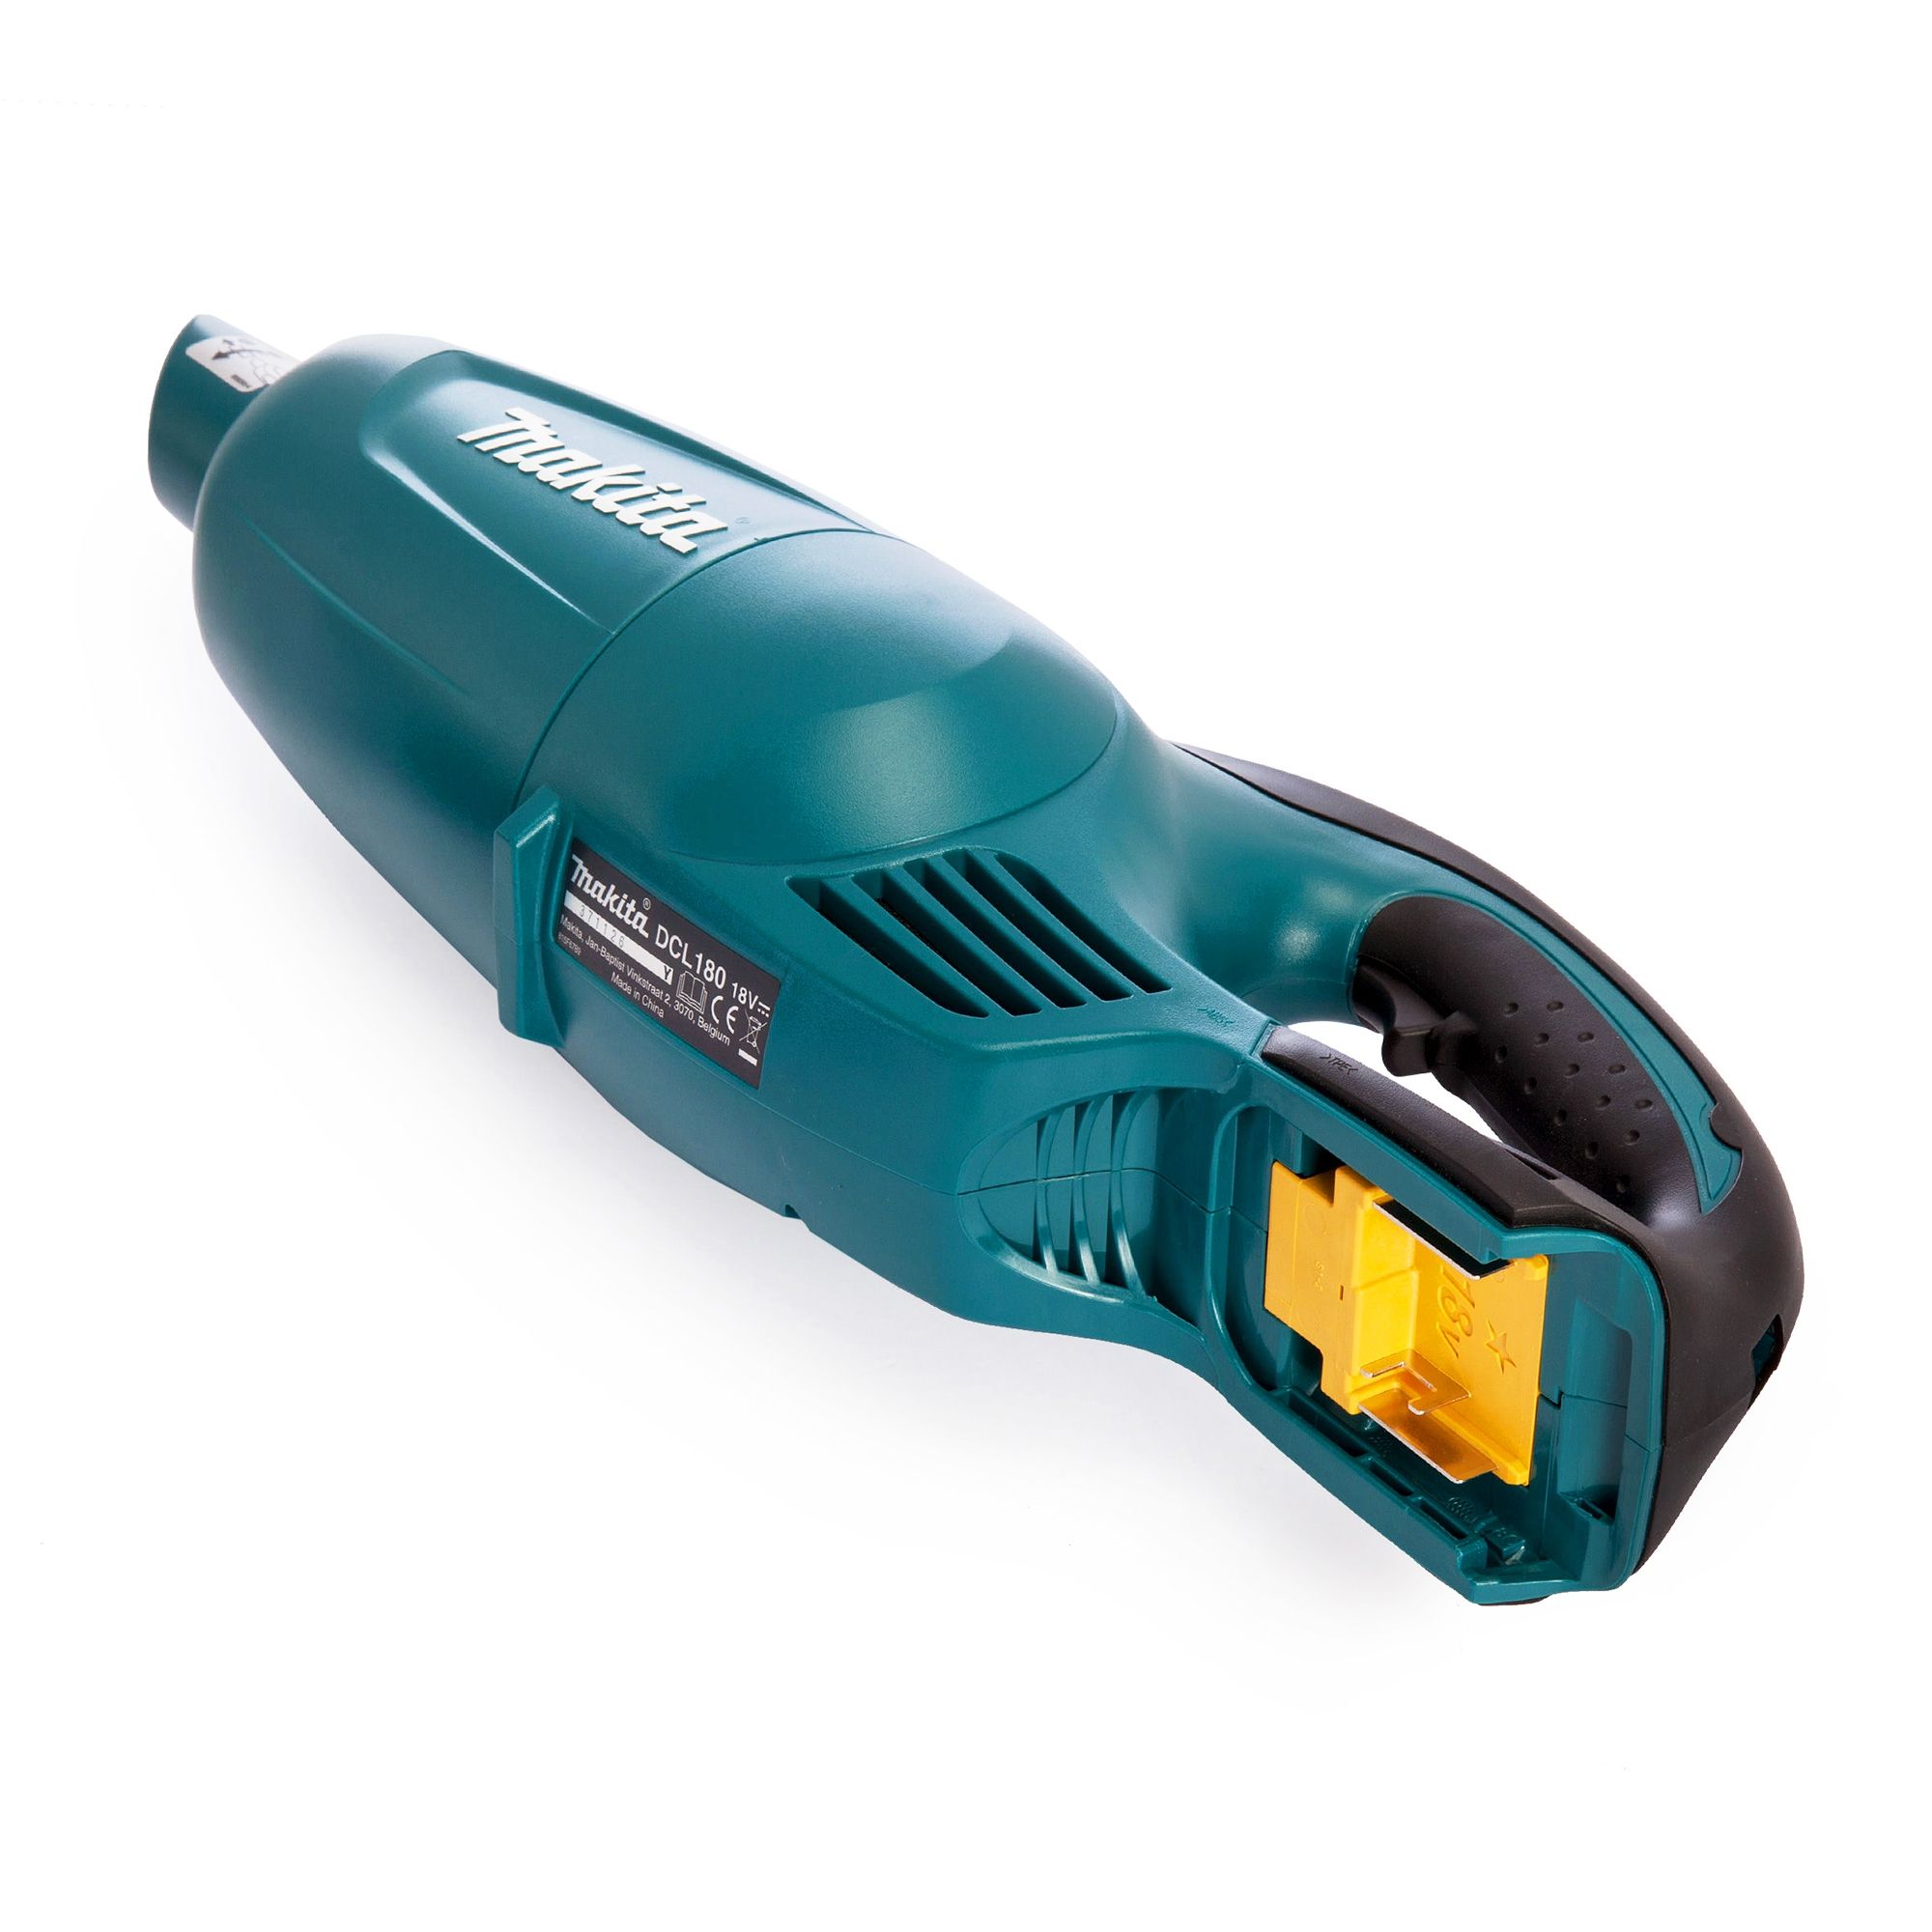 Makita DCL180Z 18V LXT Li-ion Vacuum Cleaner with 1 x 3.0Ah Battery & Charger 